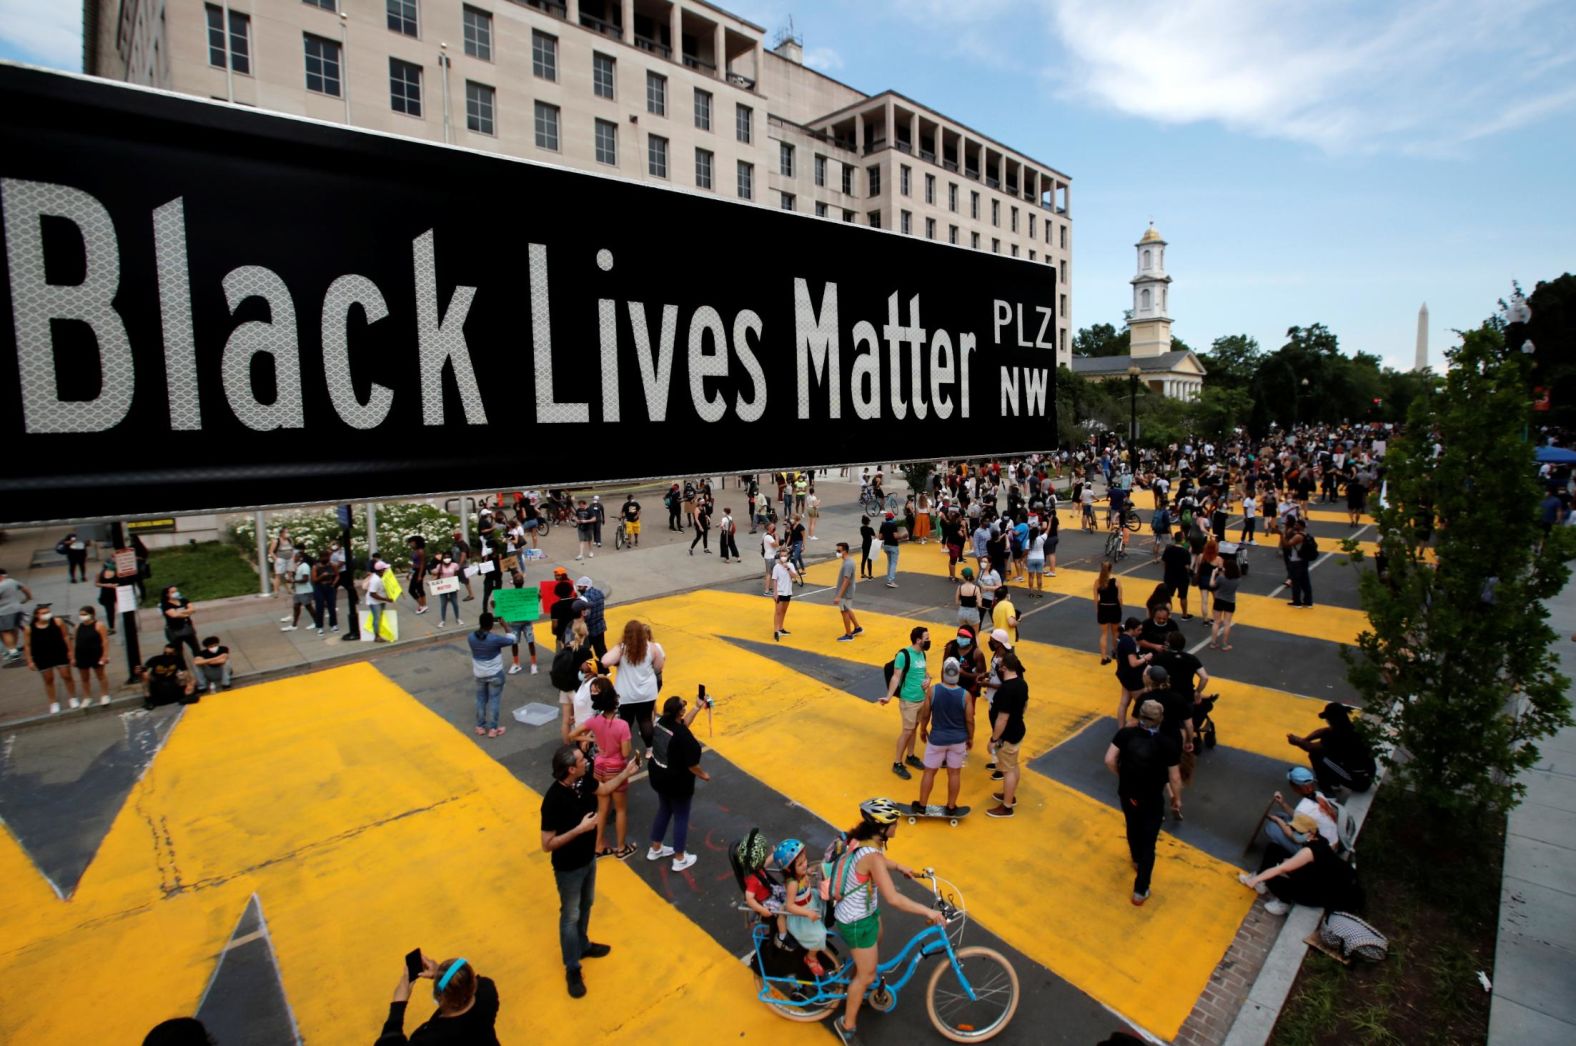 The <a href="https://www.cnn.com/2020/06/05/us/black-lives-matter-dc-street-white-house-trnd/index.html" target="_blank">new Black Lives Matter Plaza</a> is seen in Washington, DC, on June 5. The words "Black Lives Matter" were painted on two blocks of 16th Street. The painters were contracted by Mayor Muriel Bowser.